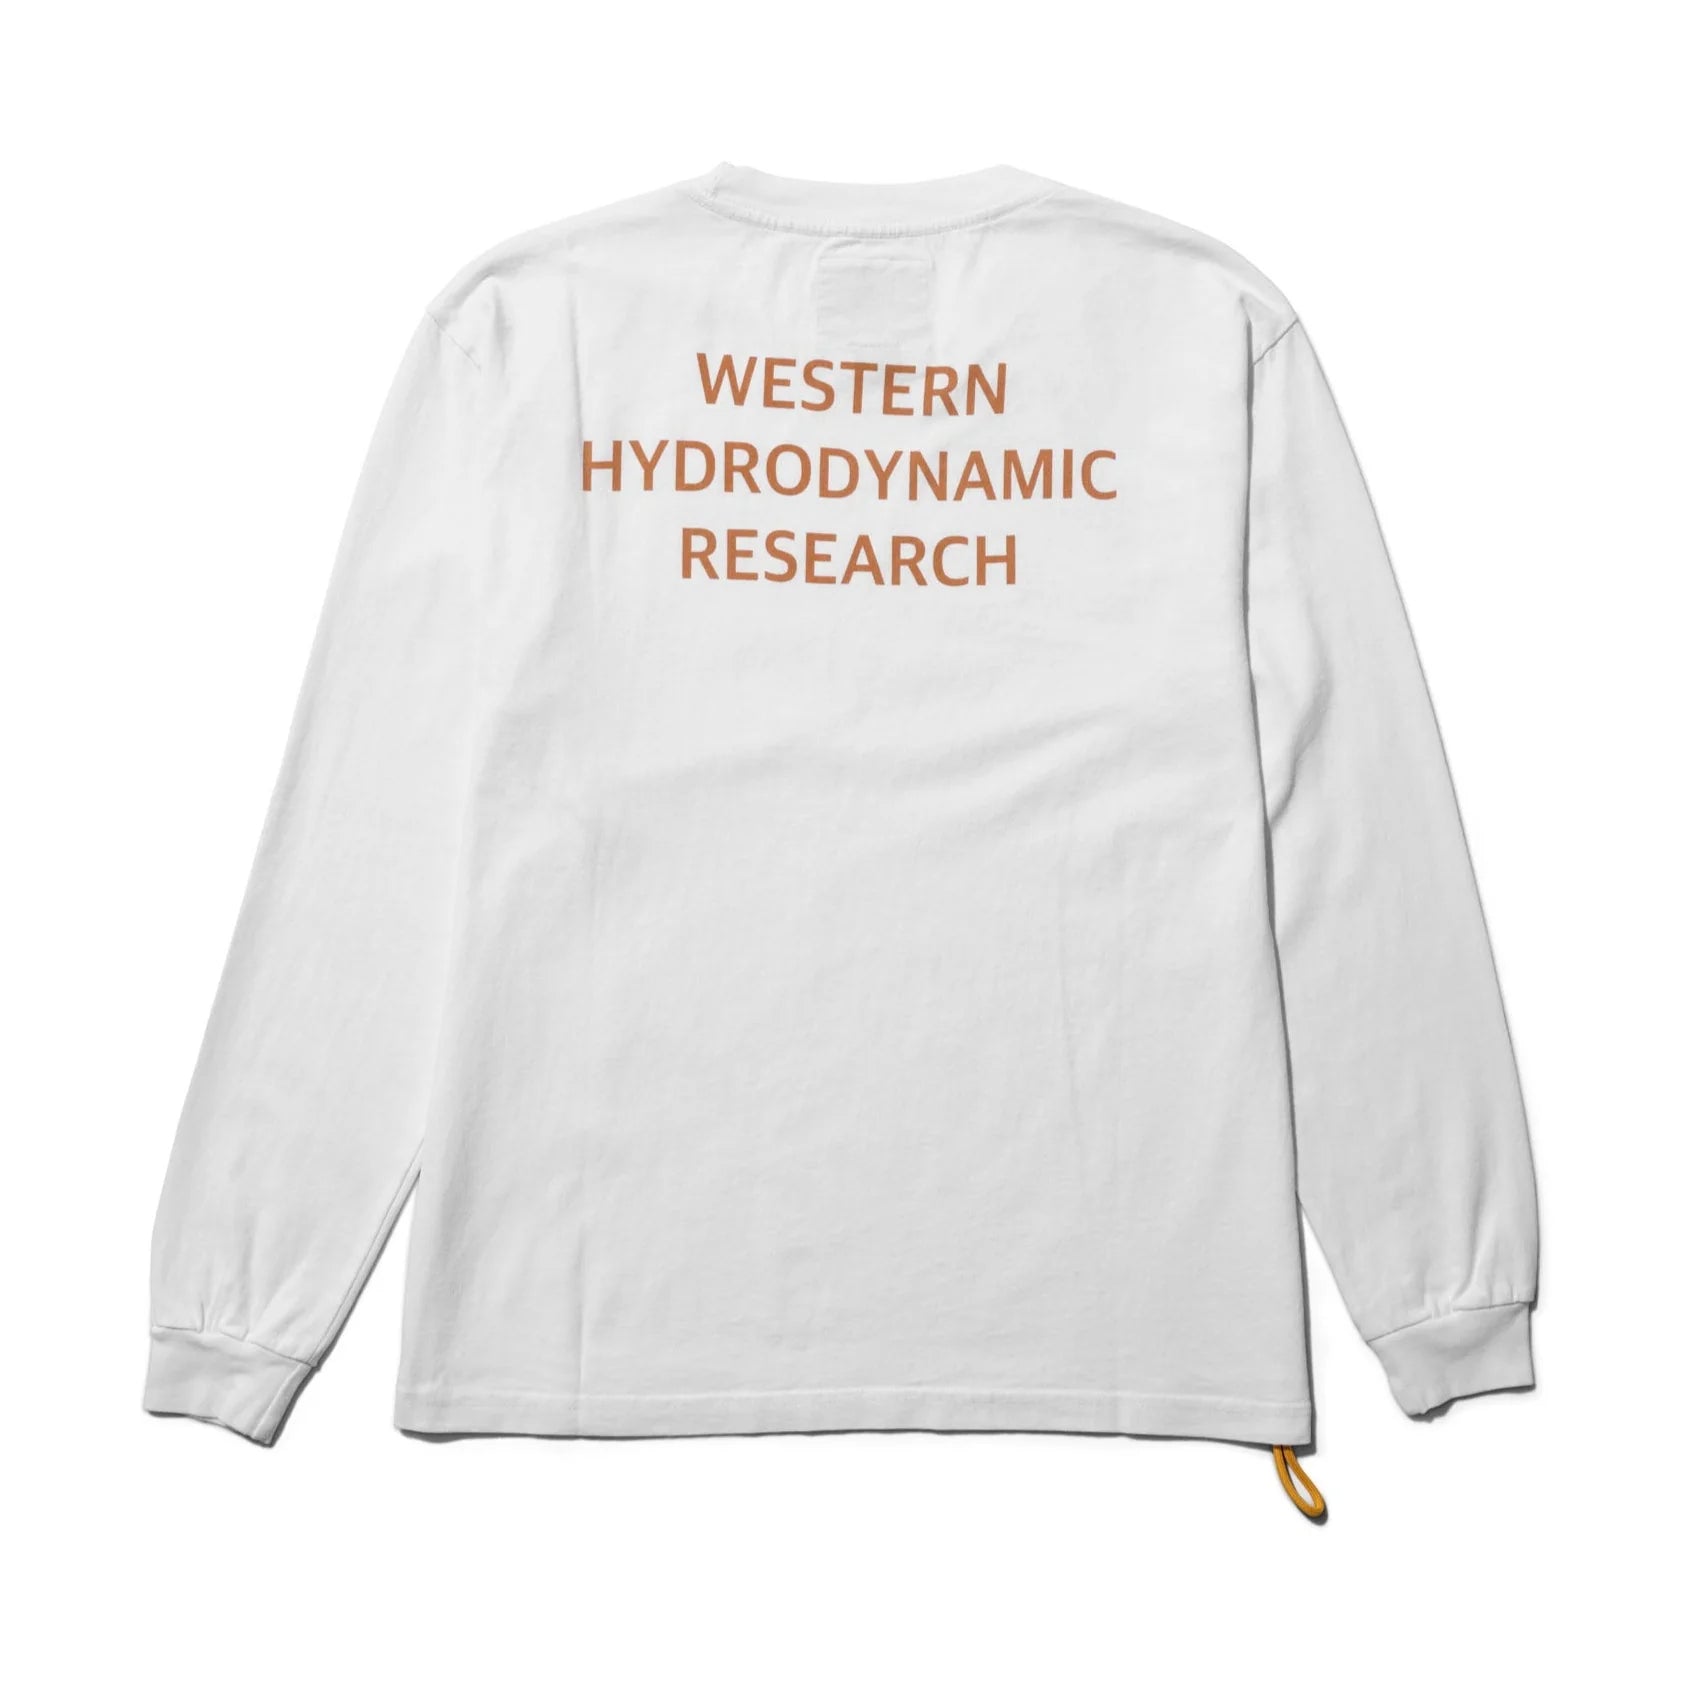 Western Hydrodynamic Research - Worker Tee (White) L/S back